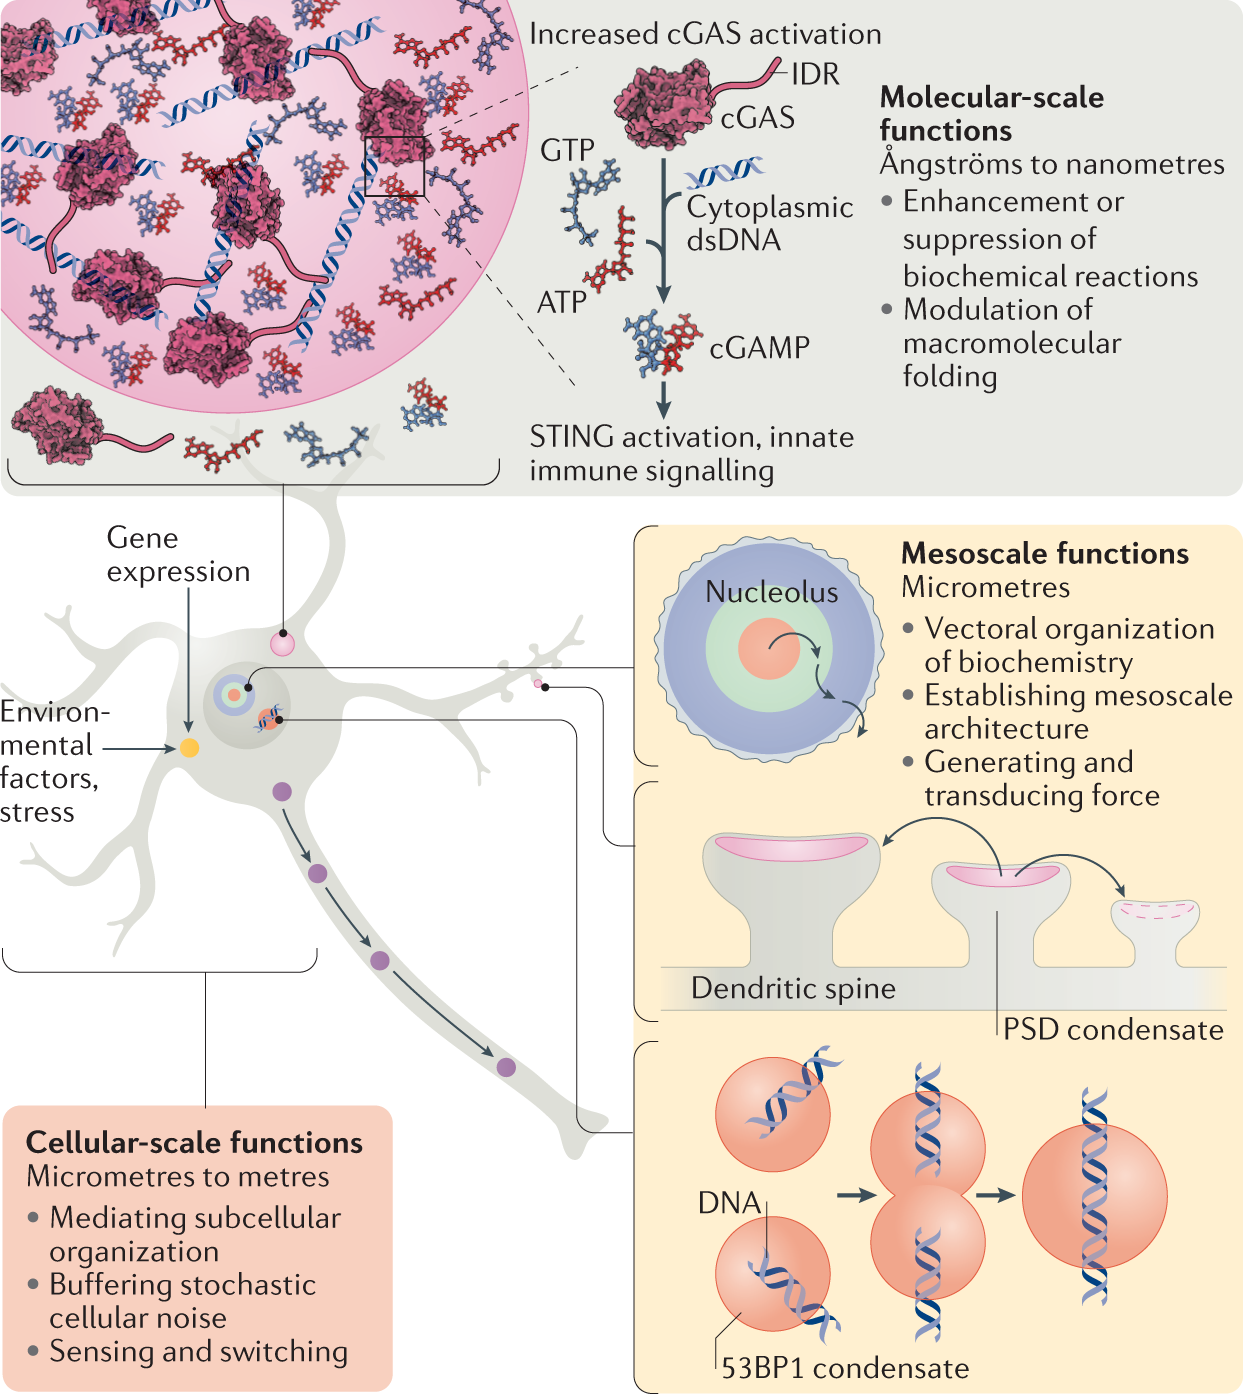 A framework for understanding the functions of biomolecular condensates  across scales | Nature Reviews Molecular Cell Biology